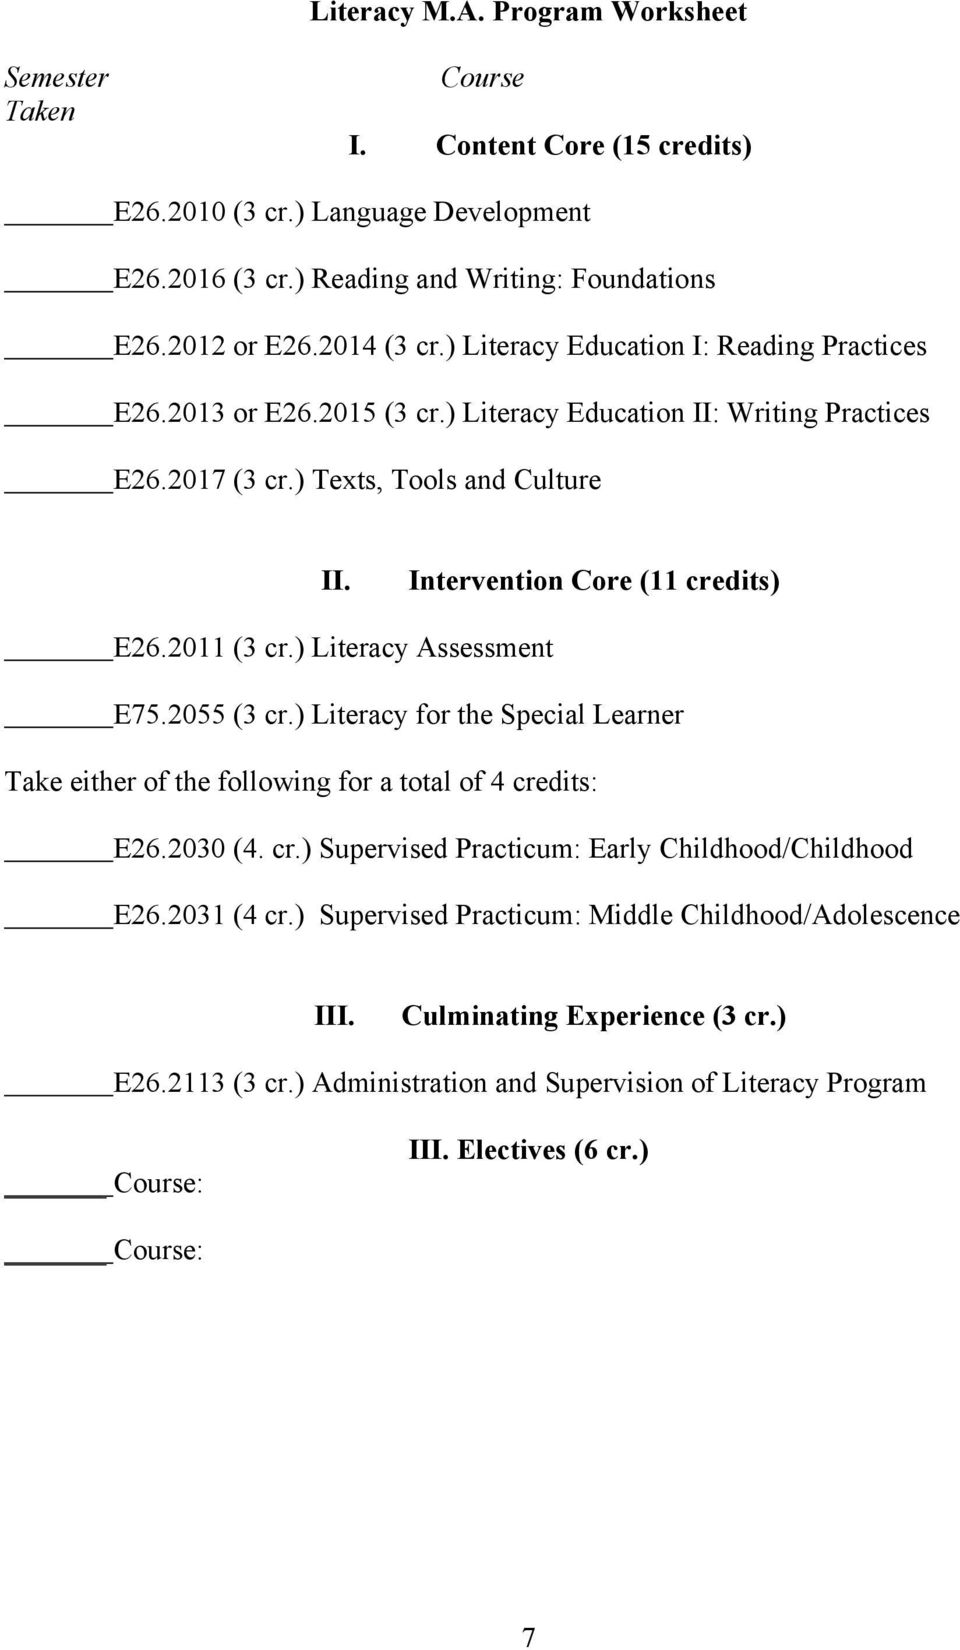 2011 (3 cr.) Literacy Assessment E75.2055 (3 cr.) Literacy for the Special Learner Take either of the following for a total of 4 credits: E26.2030 (4. cr.) Supervised Practicum: Early Childhood/Childhood E26.